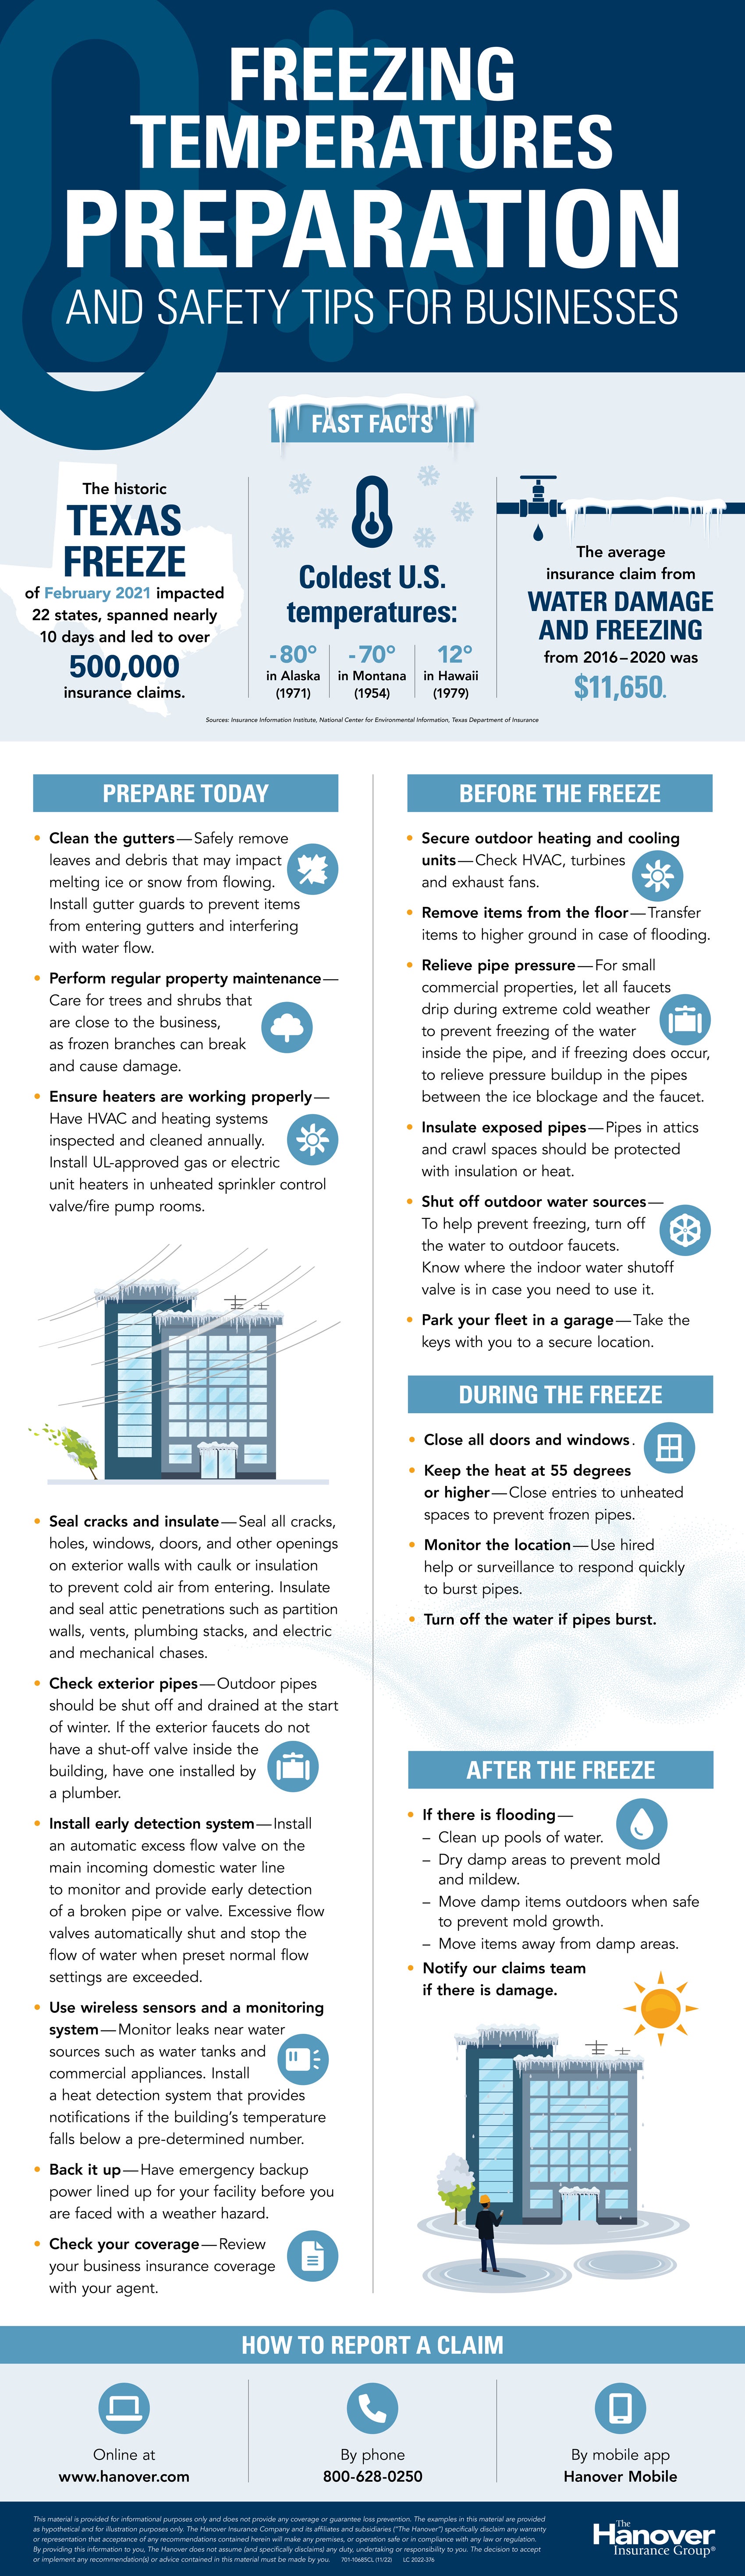 Infographic with business tips for what to do before, during and after freezing temperatures.